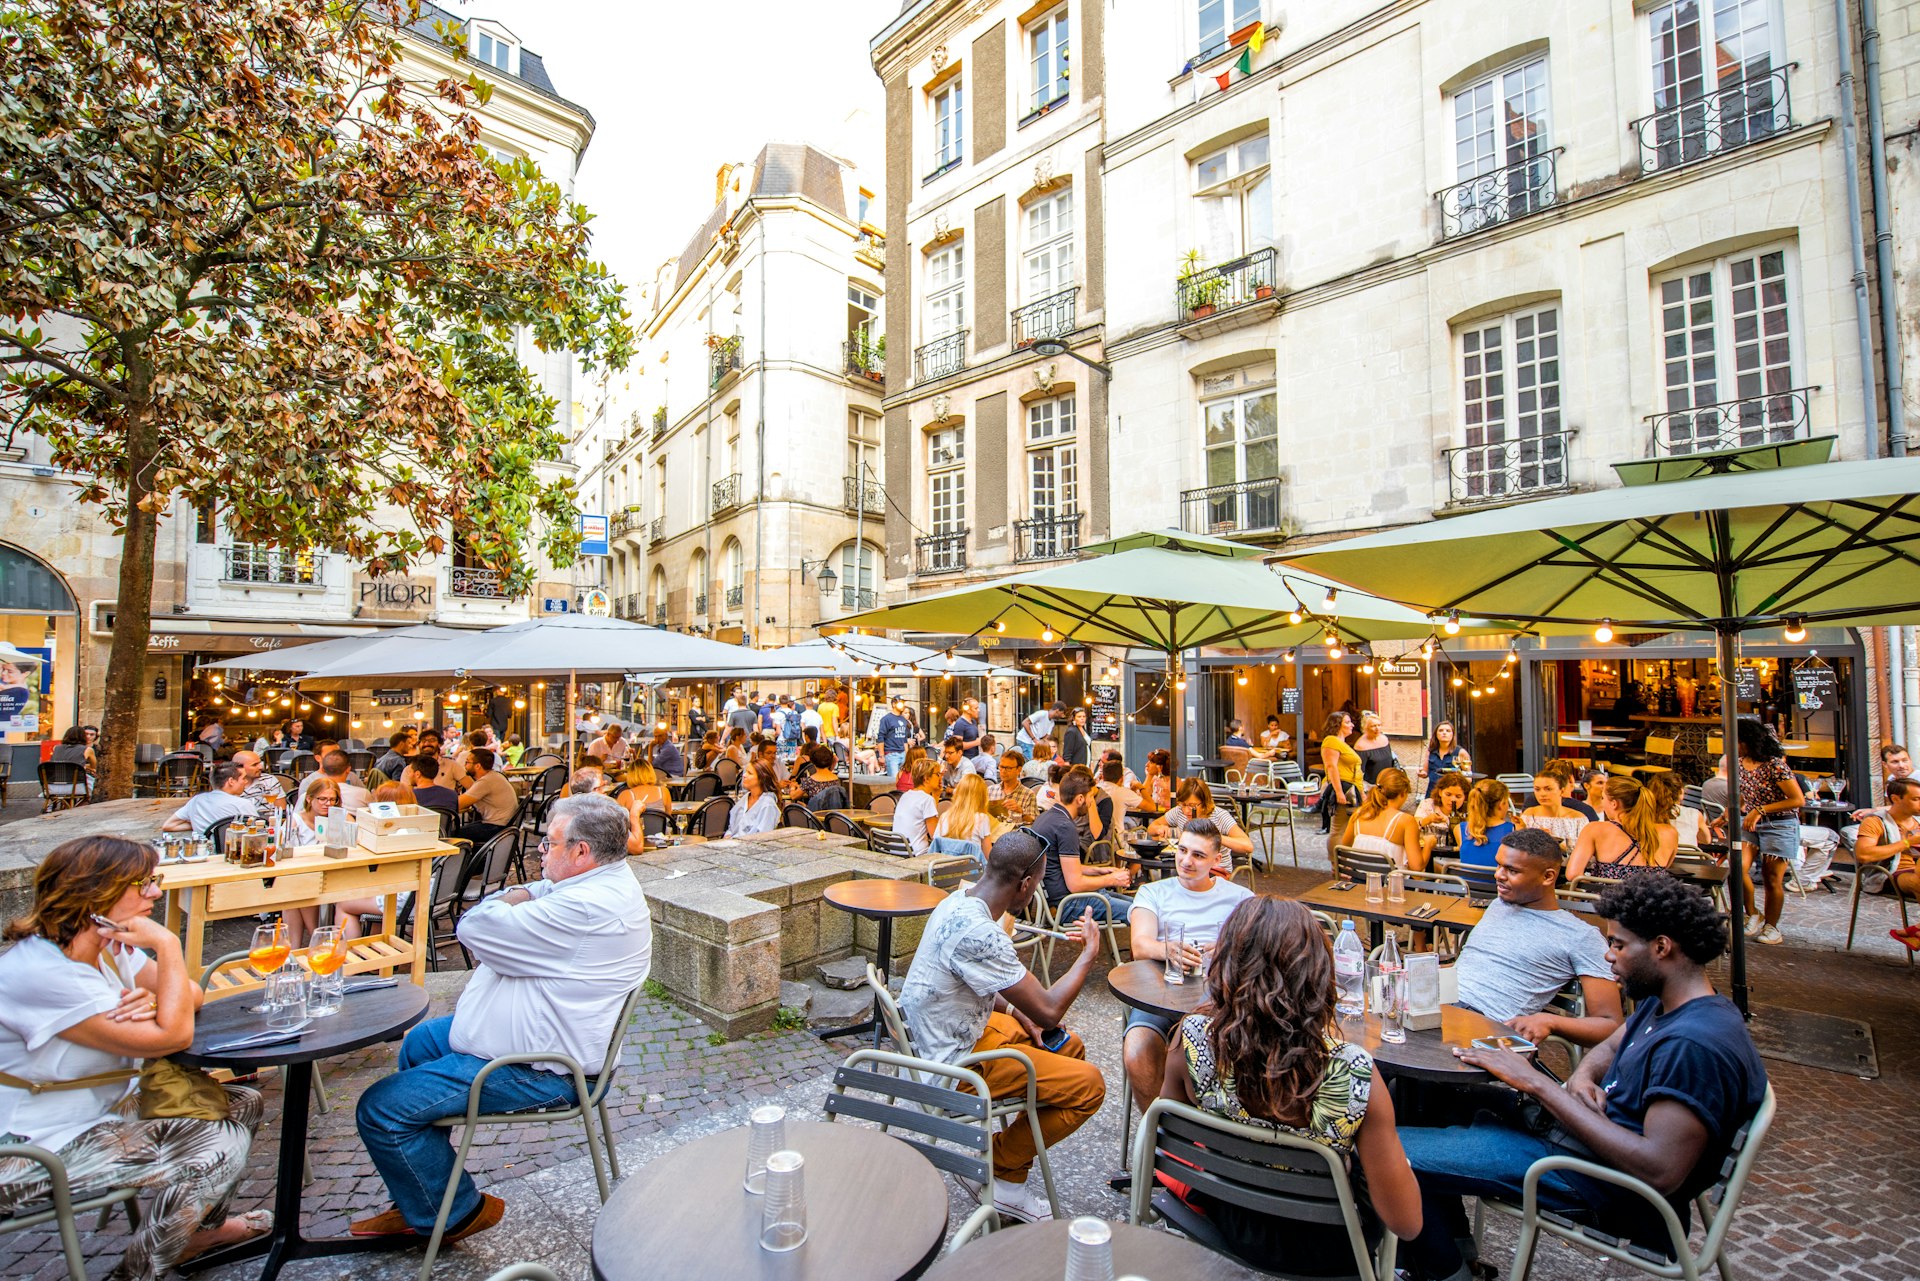 : Street view with cafes and restaurant full of people in the old town of Nantes city in France